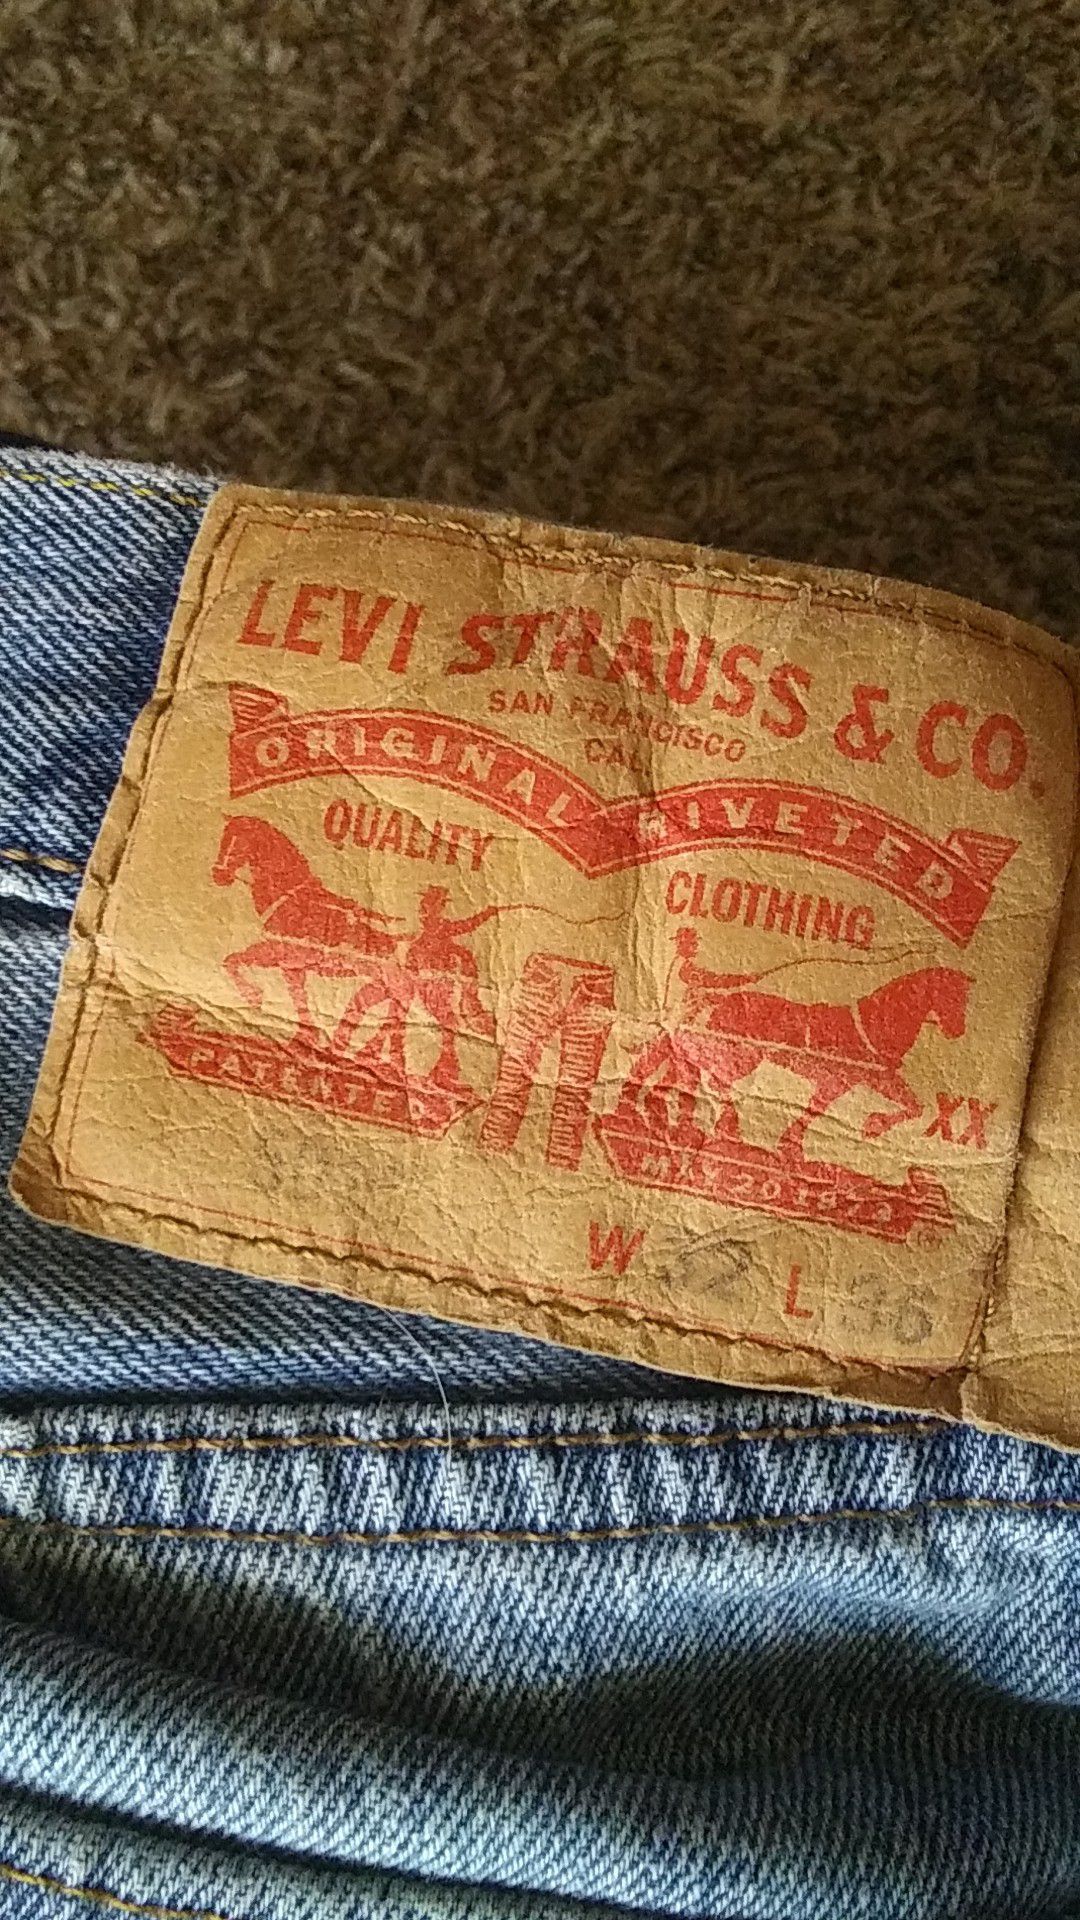 $10 for each $20 for all. Men Levis pants and pajama, used but wearable.